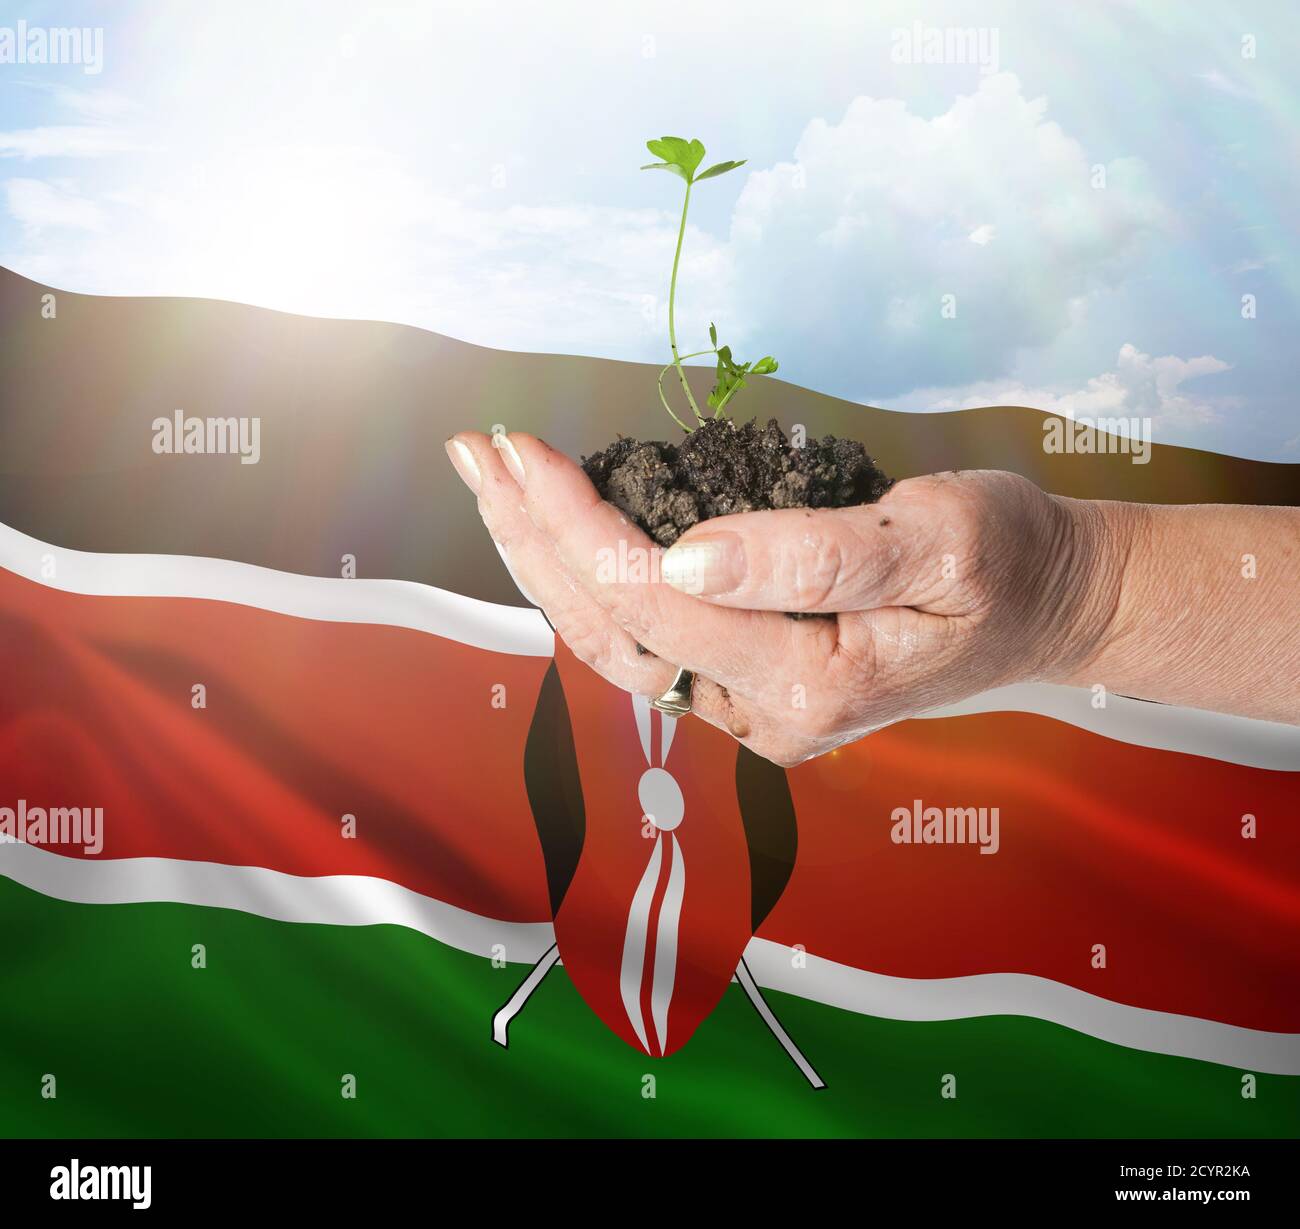 Kenya growth and new beginning. Green renewable energy and ecology concept. Hand holding young plant. Stock Photo